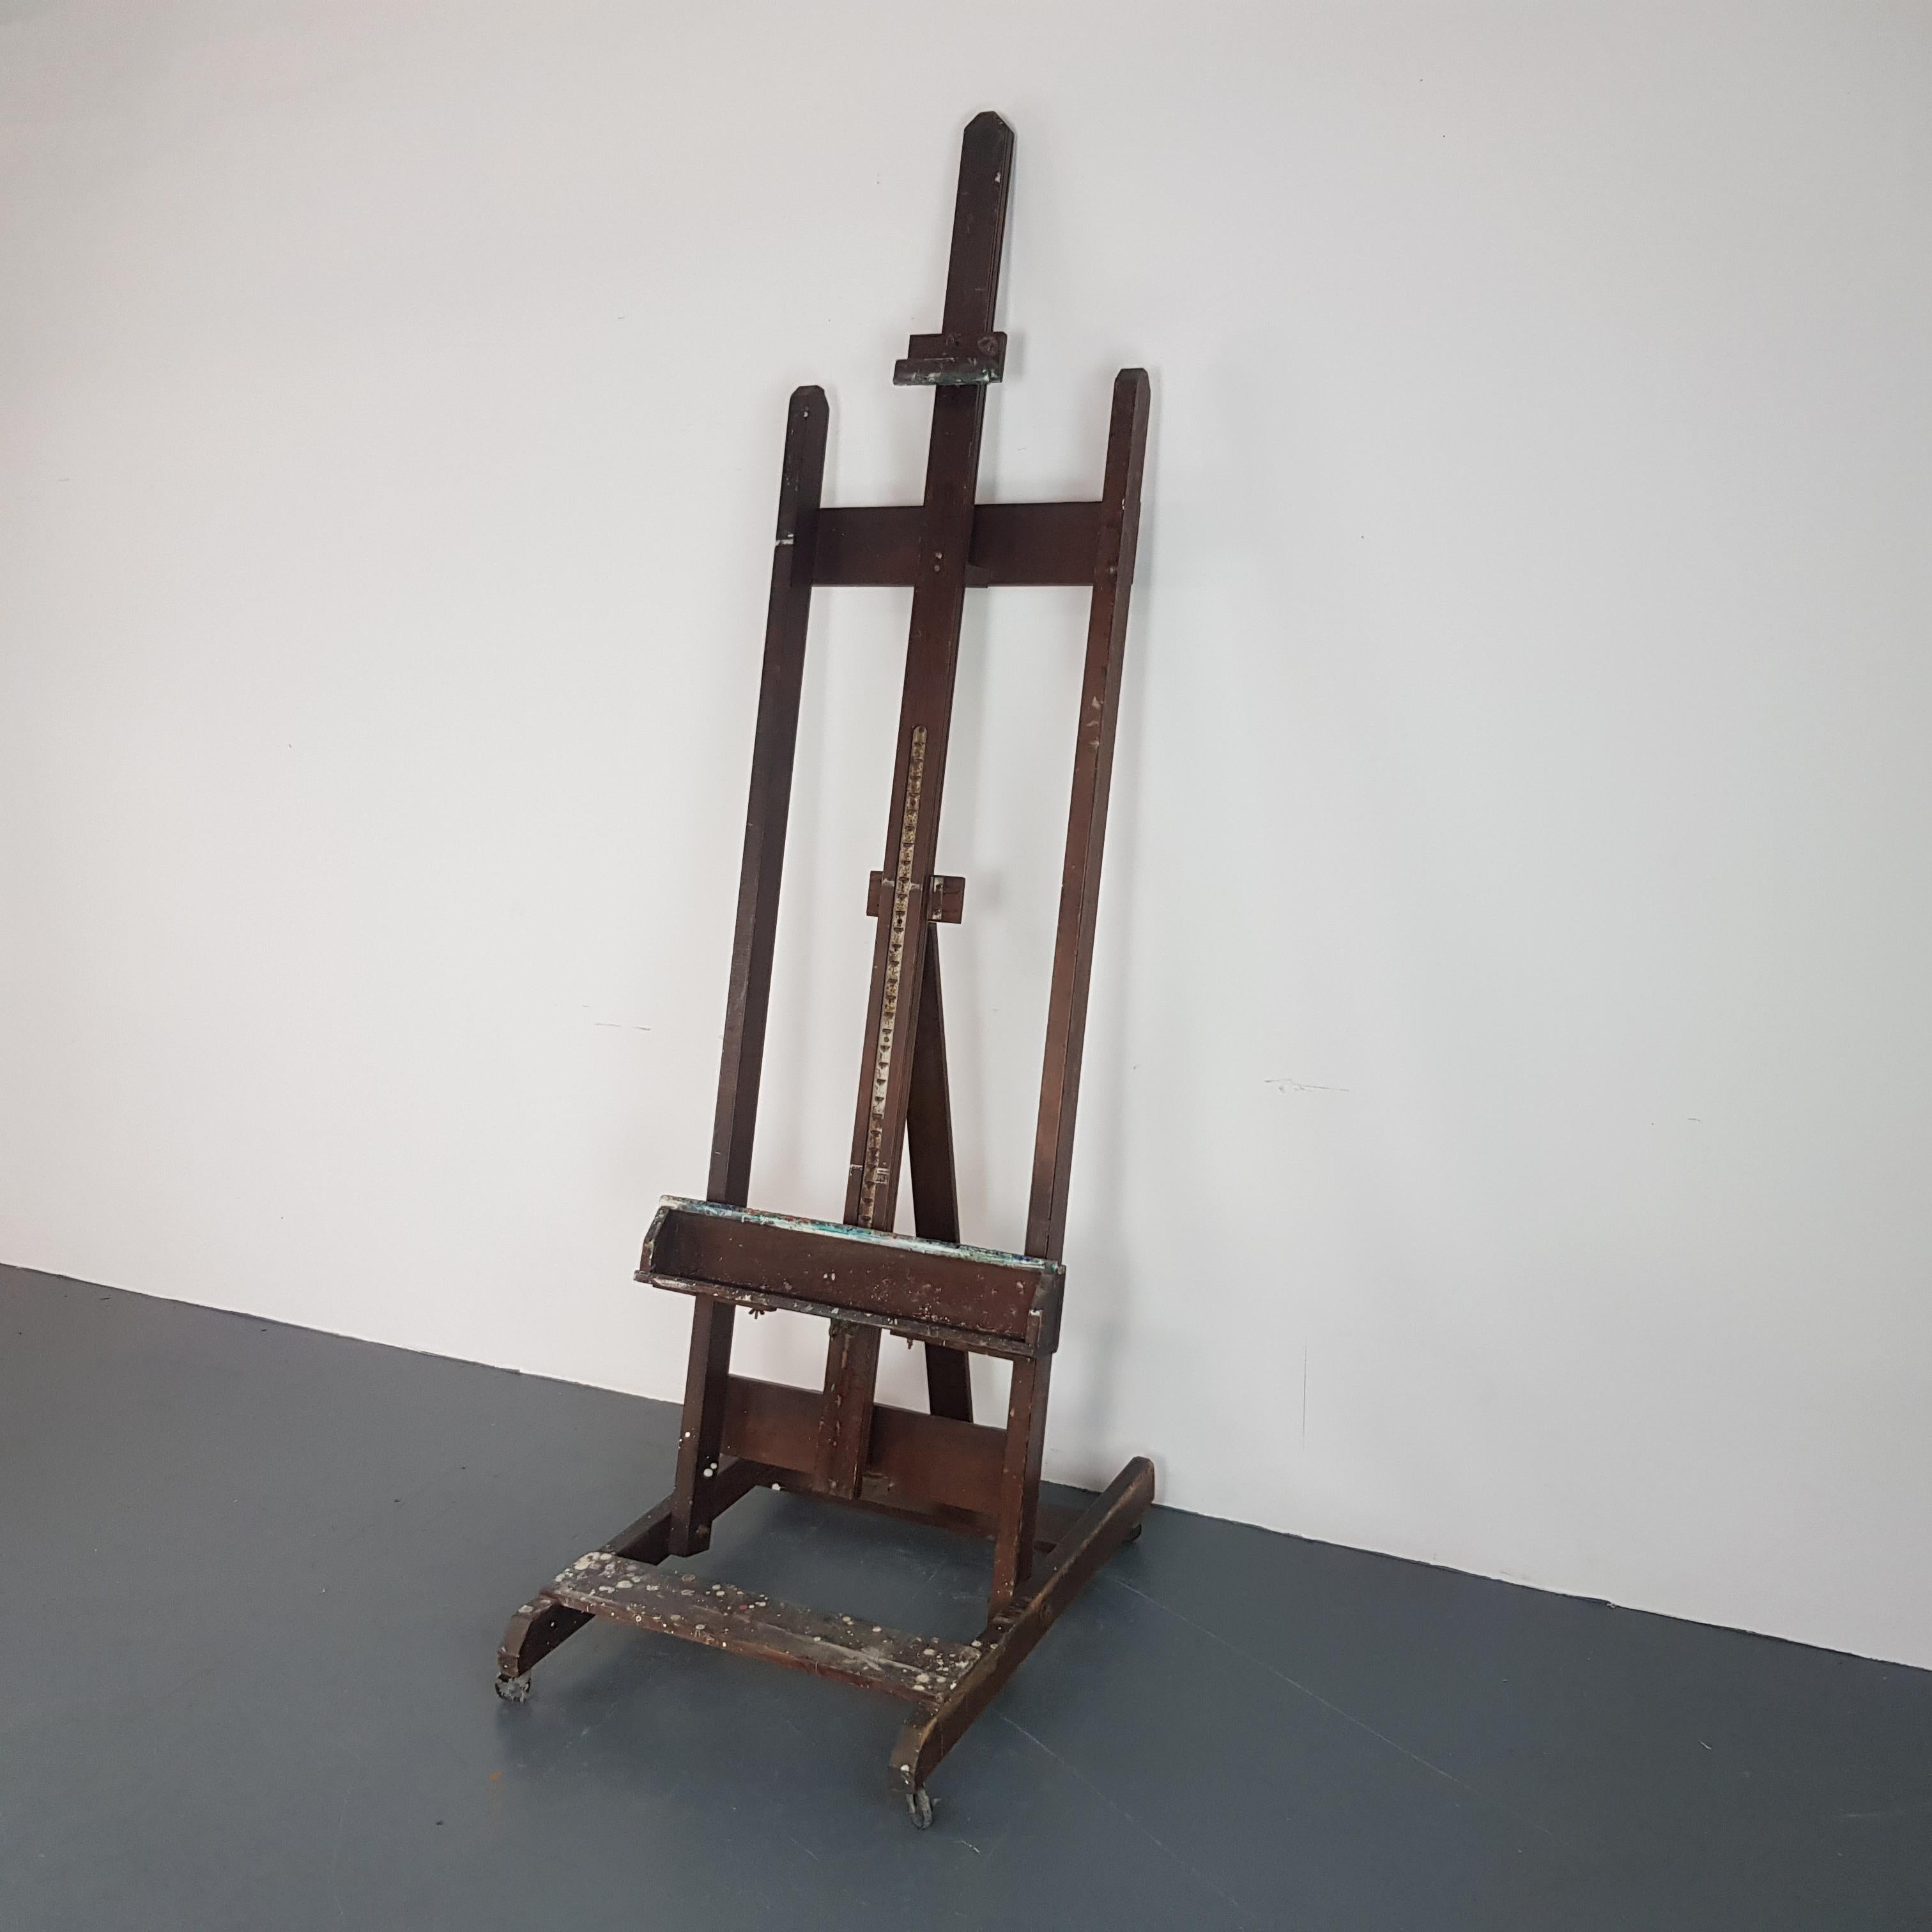 Vintage Midcentury Anco Bilt Artist's Easel In Good Condition In Lewes, East Sussex